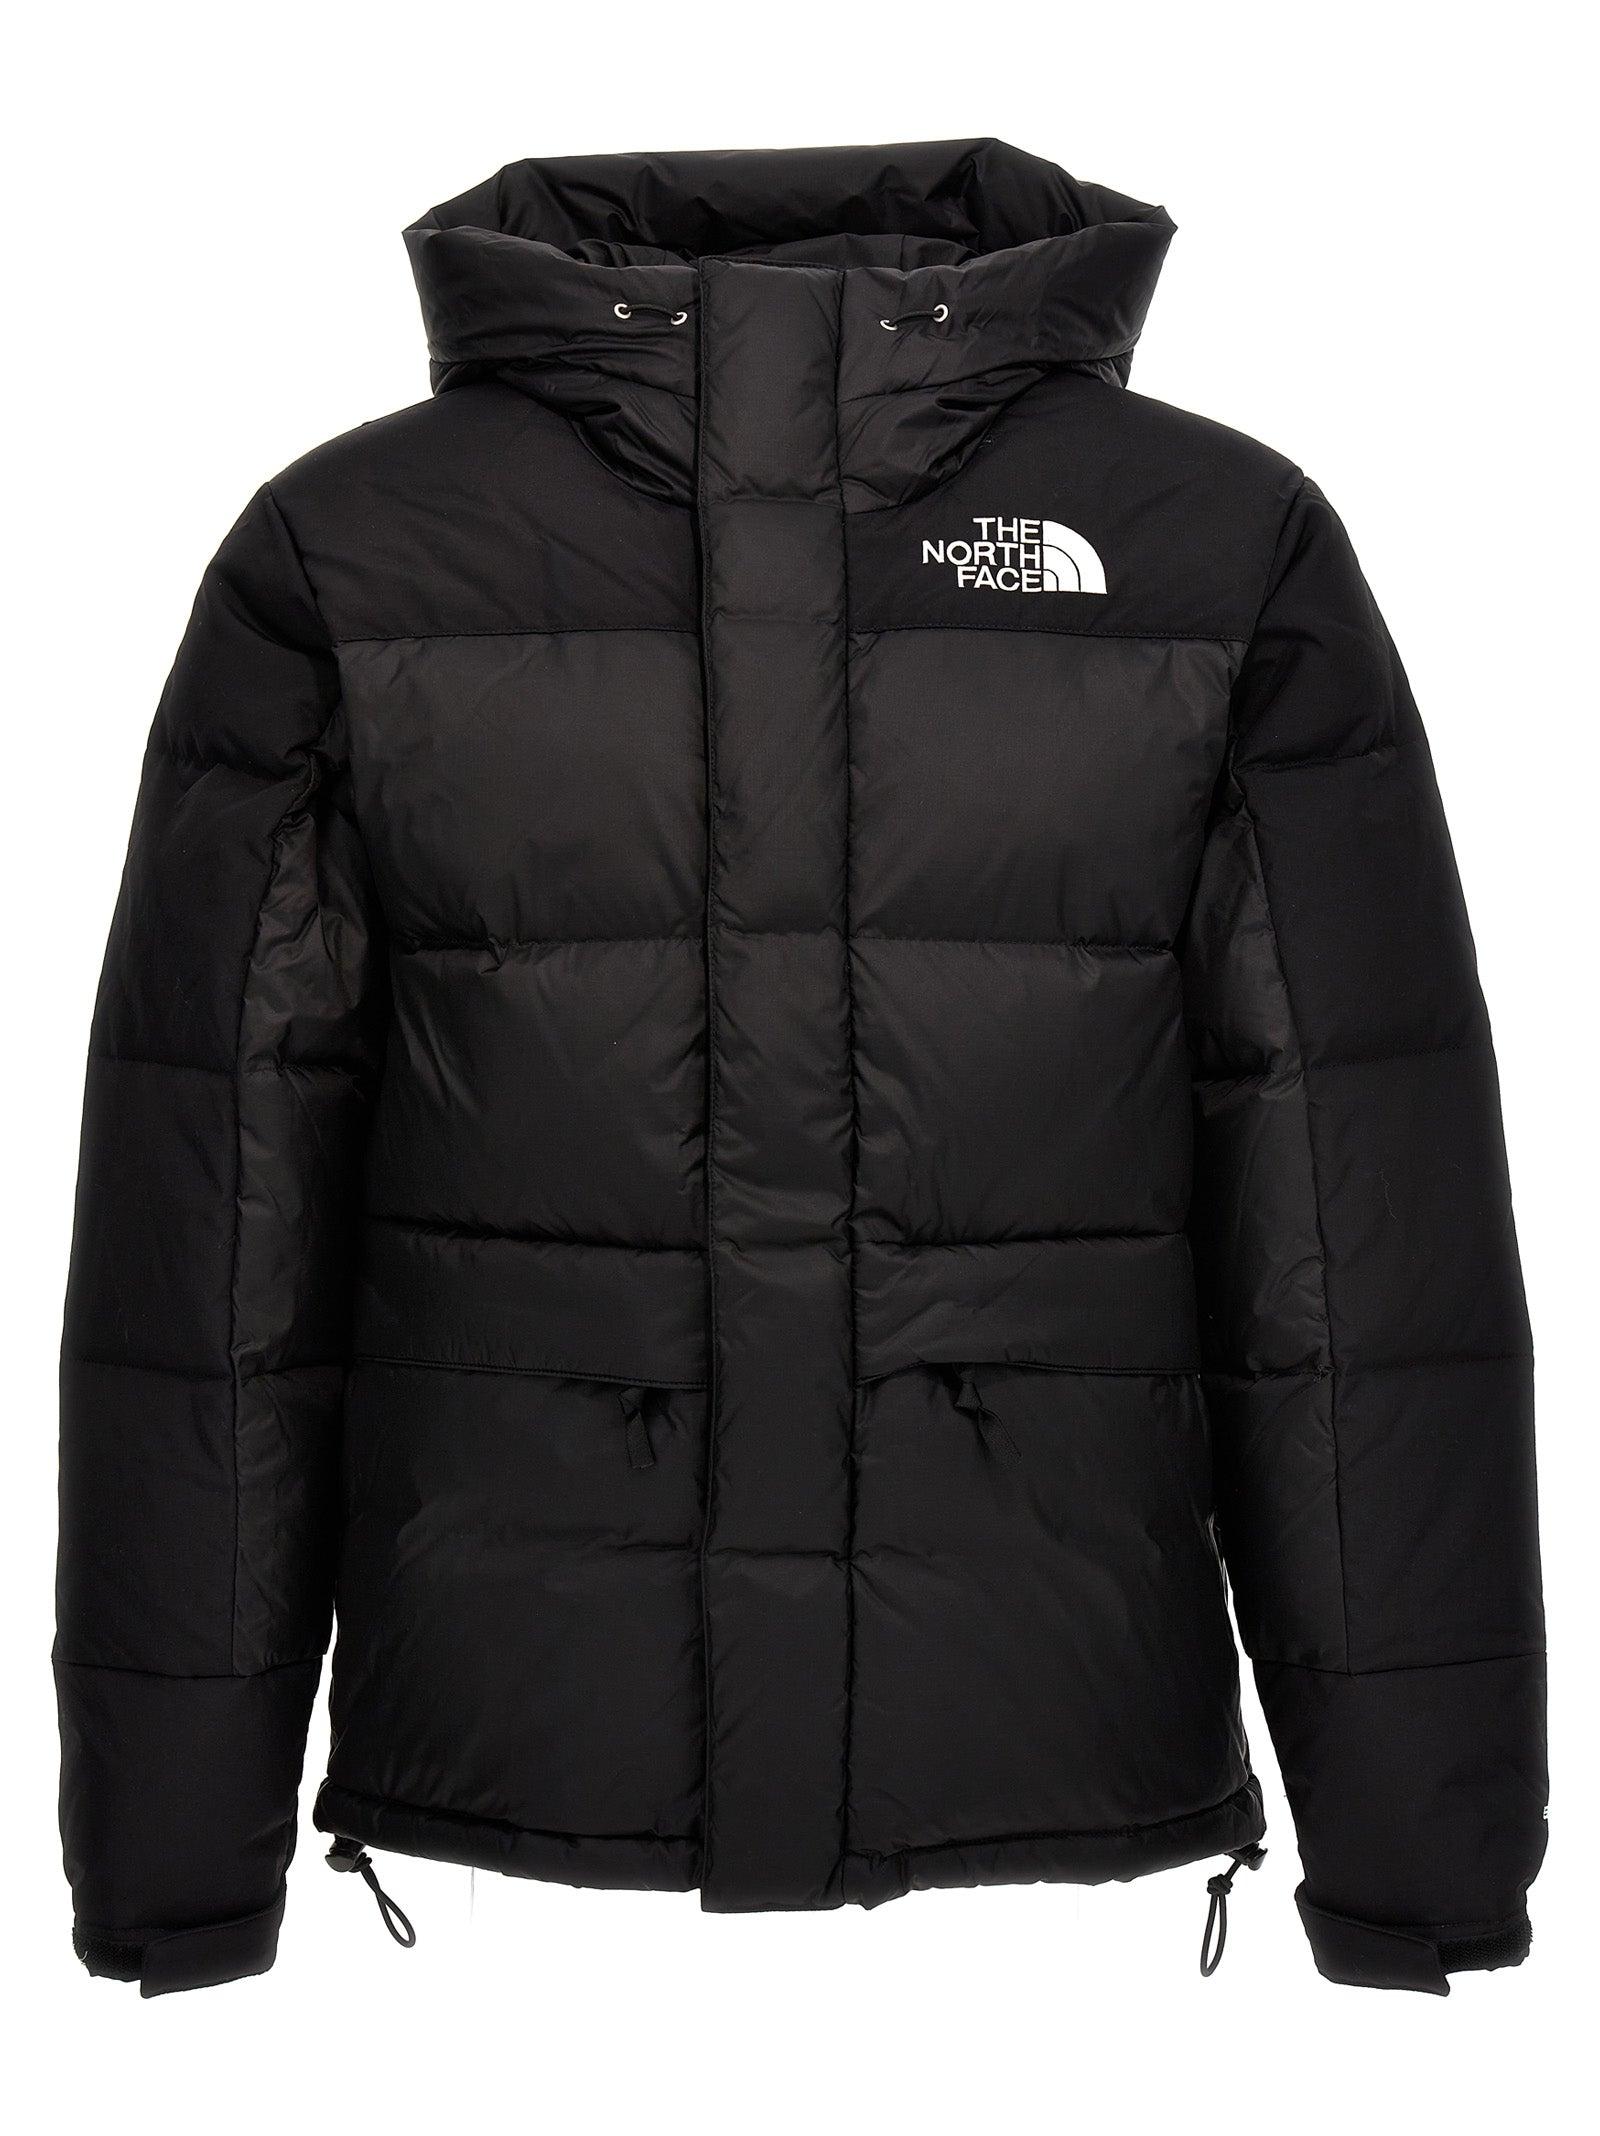 The North Face Himalayan Casual Jackets, Parka in Black for Men